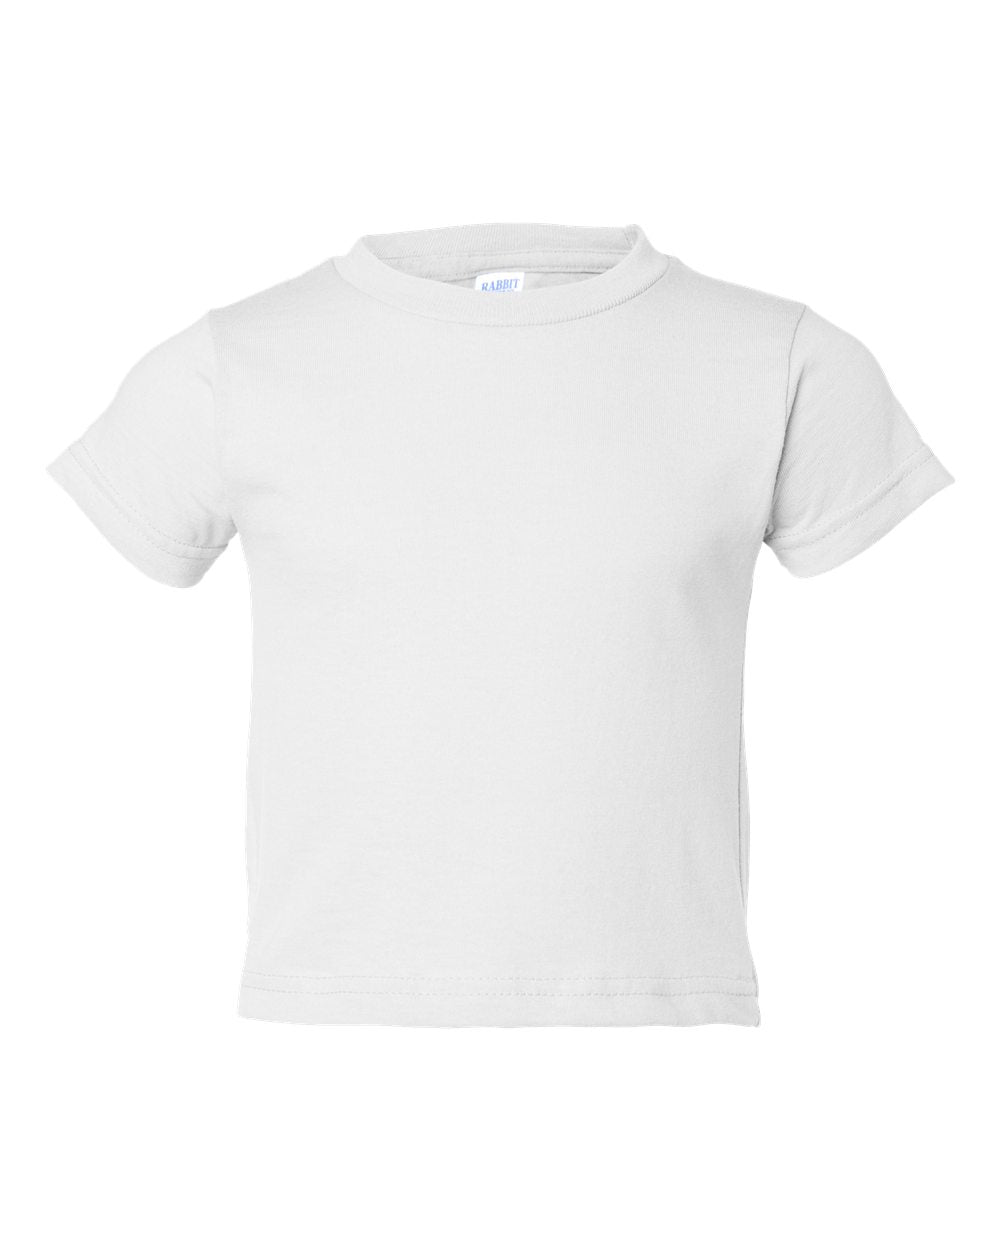 Rabbit Skins Toddler Cotton Jersey Tee 3301T #color_White